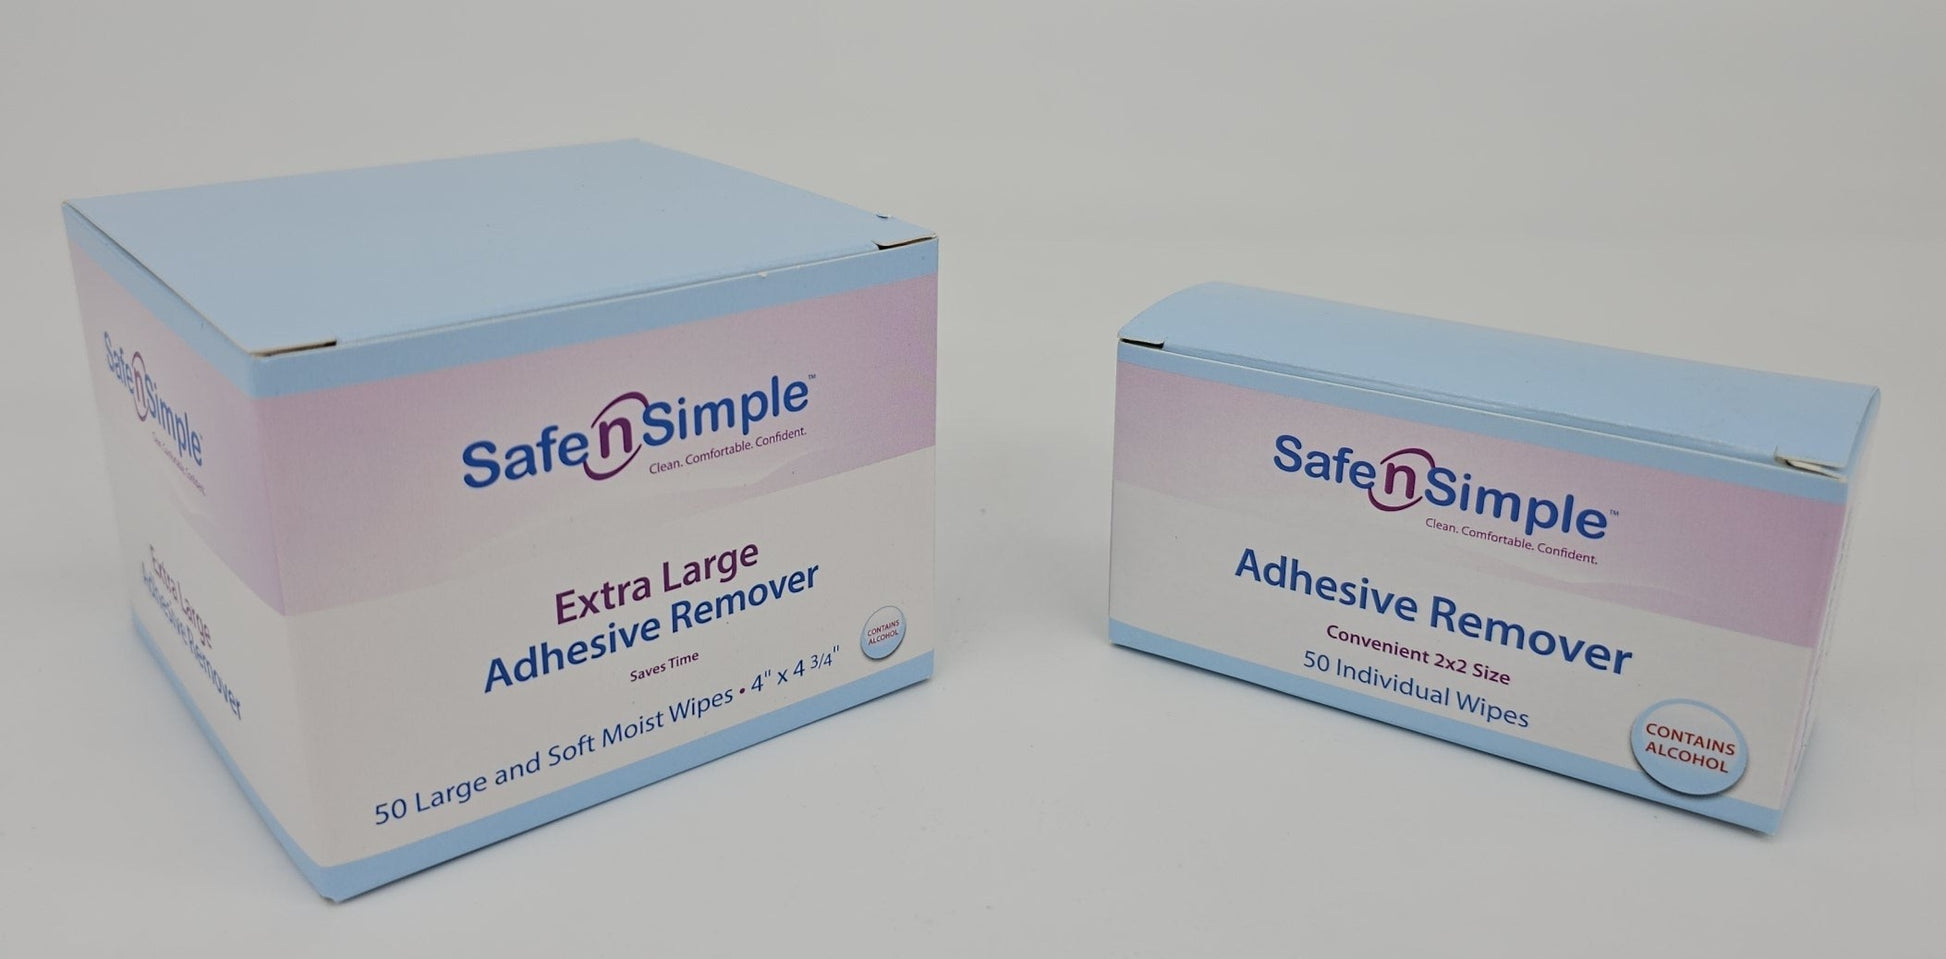 Safe N Simple Adhesive Remover Wipes - 2x2 (Amount: Box of 50)